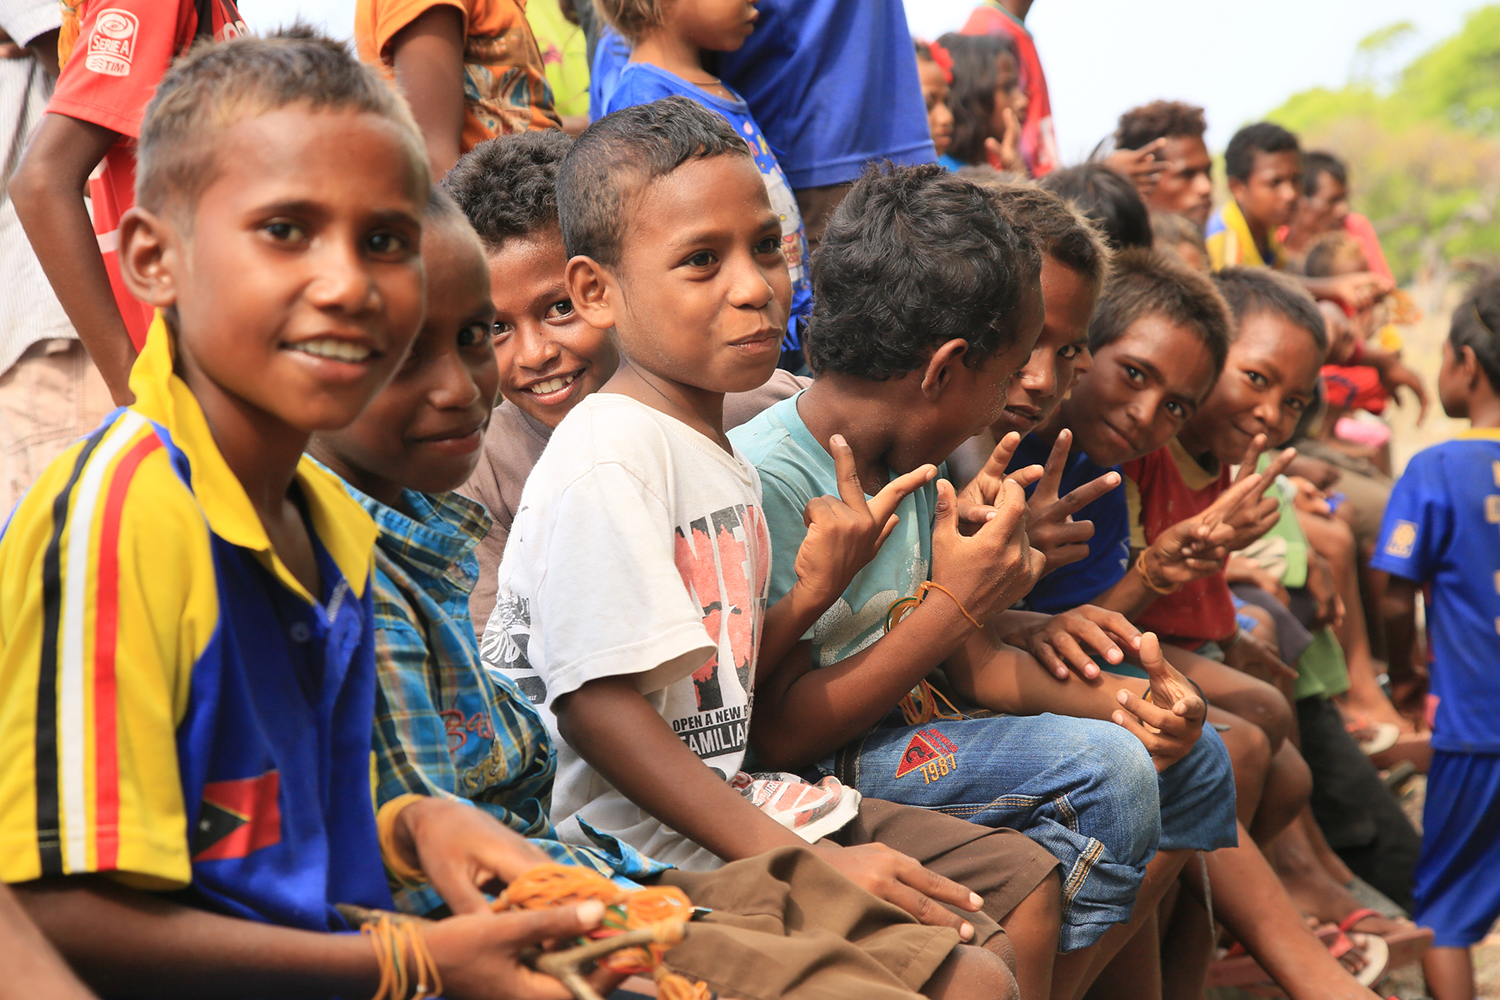 Timor Leste children sitting together hold hand peace signs.